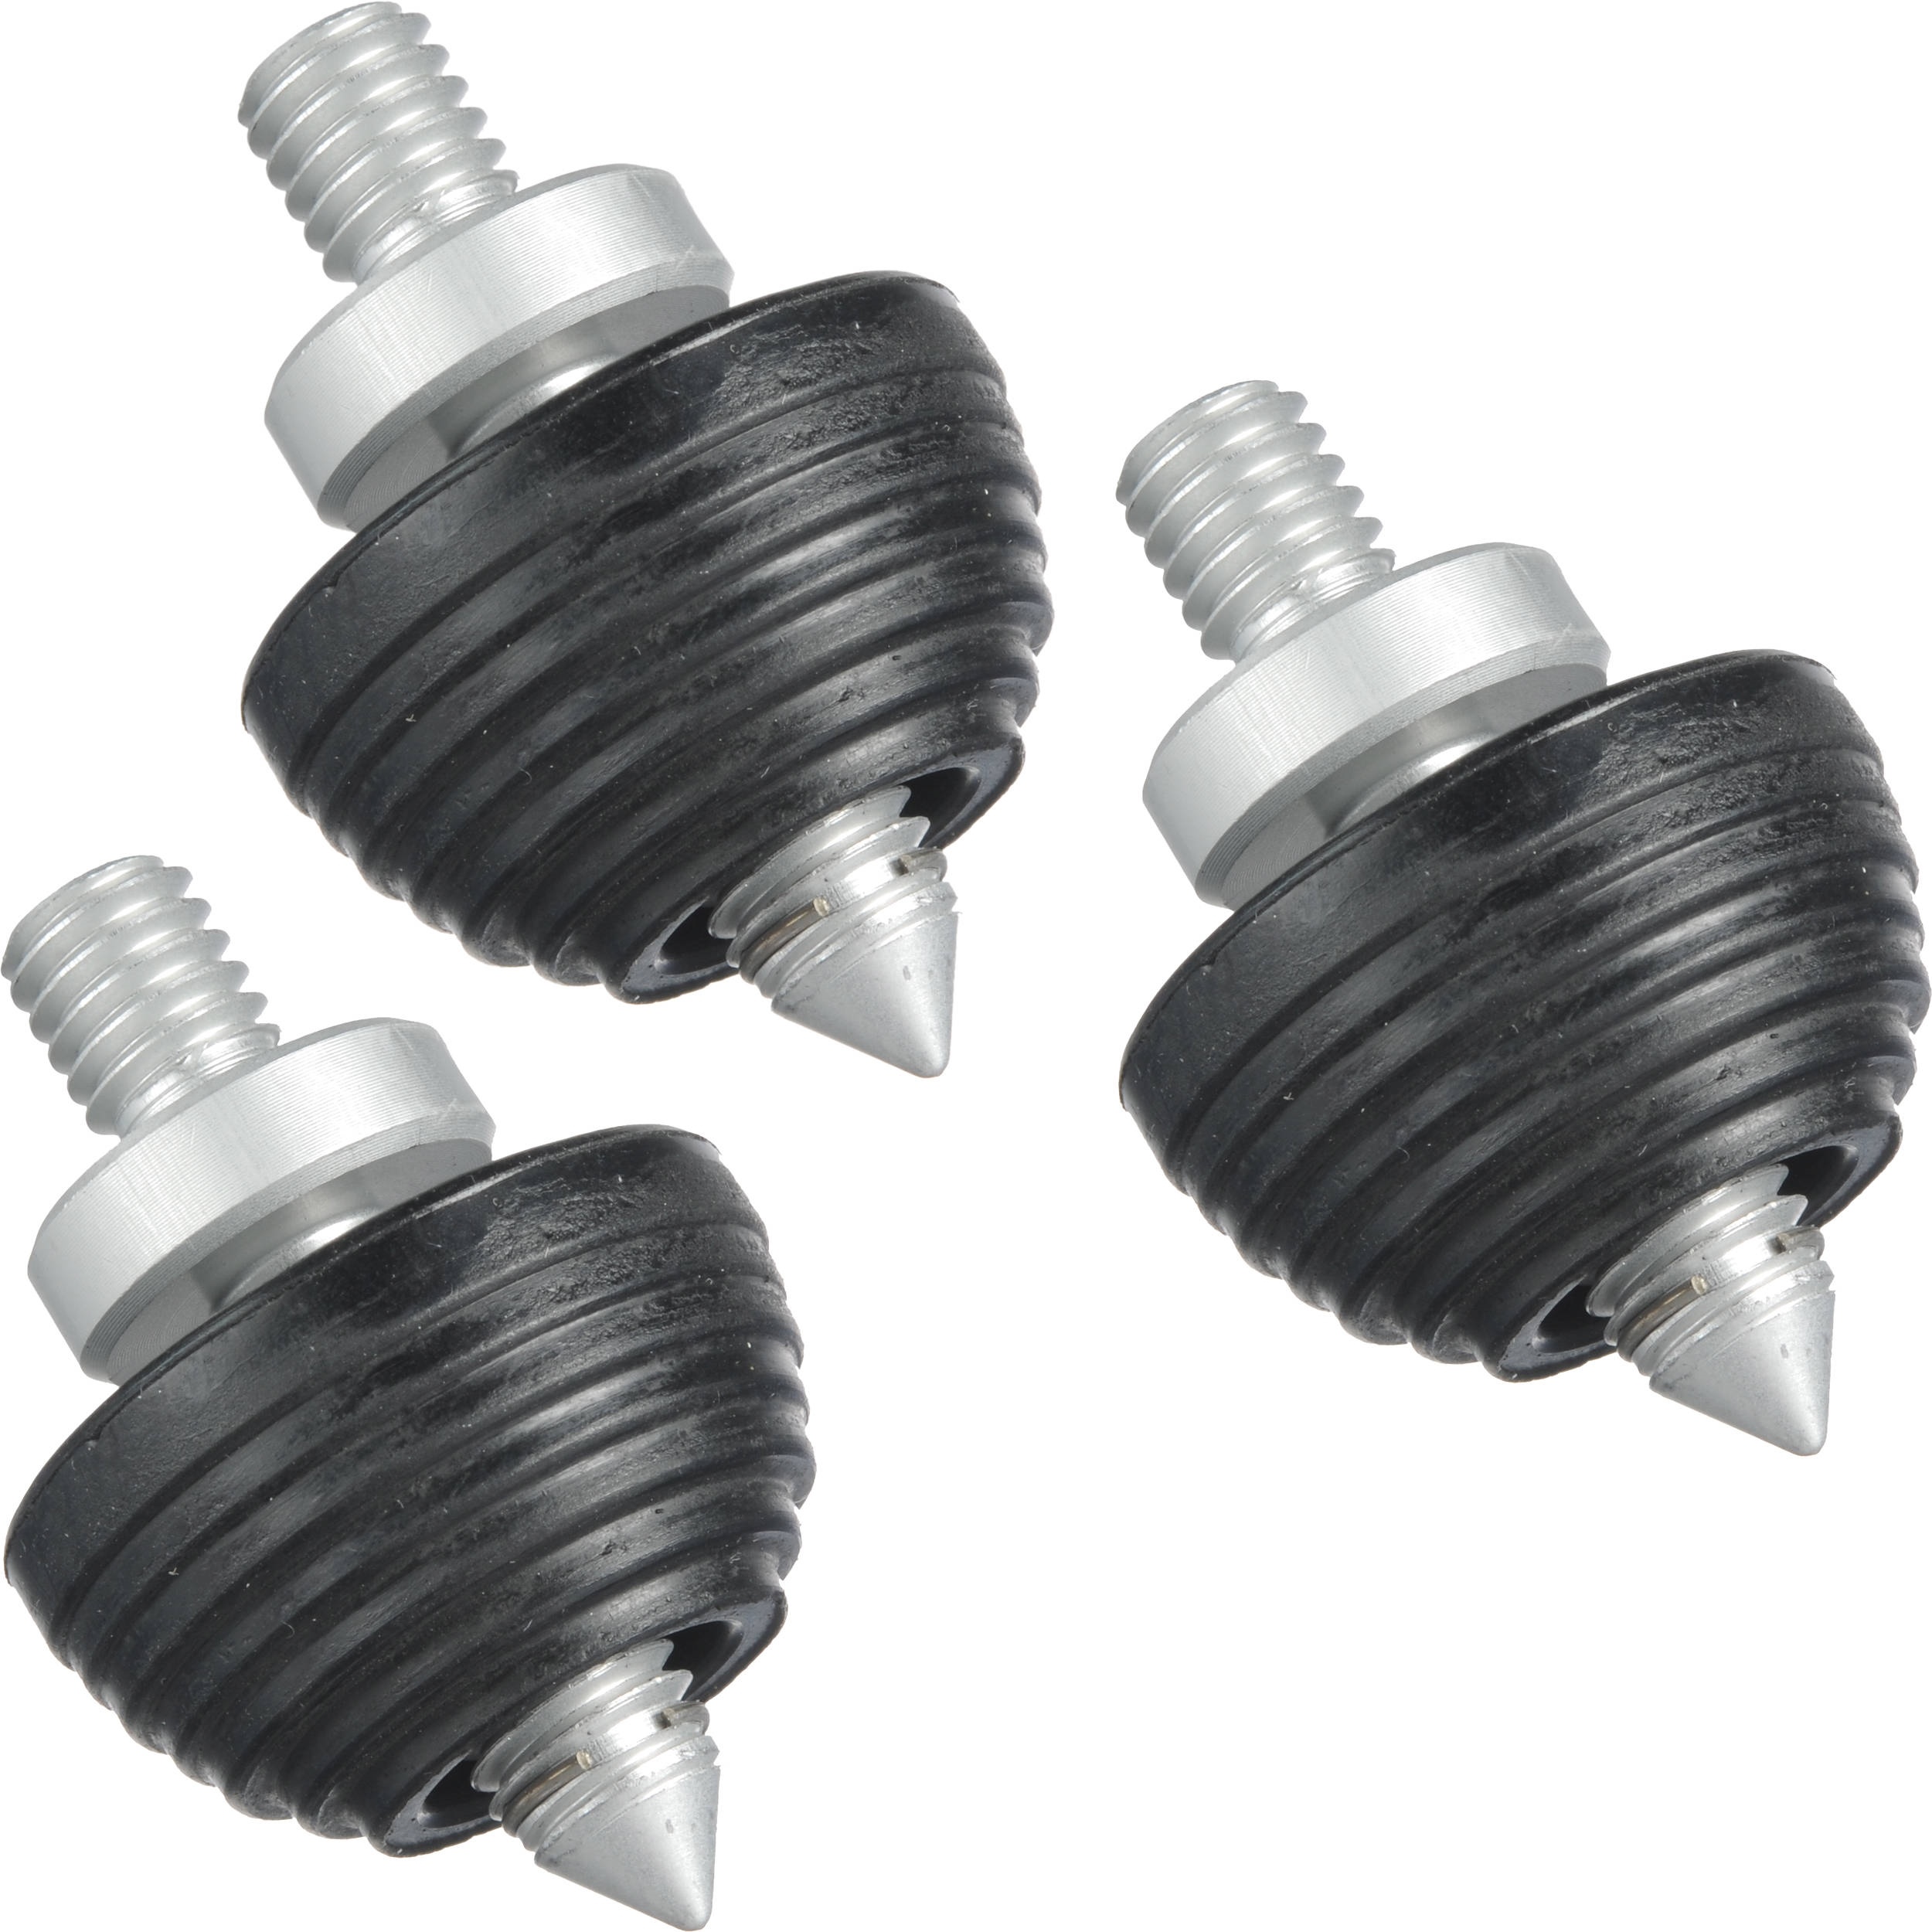 Gitzo GS5030VSF Retractable Spiked Feet Adapter Set (3 Pieces)